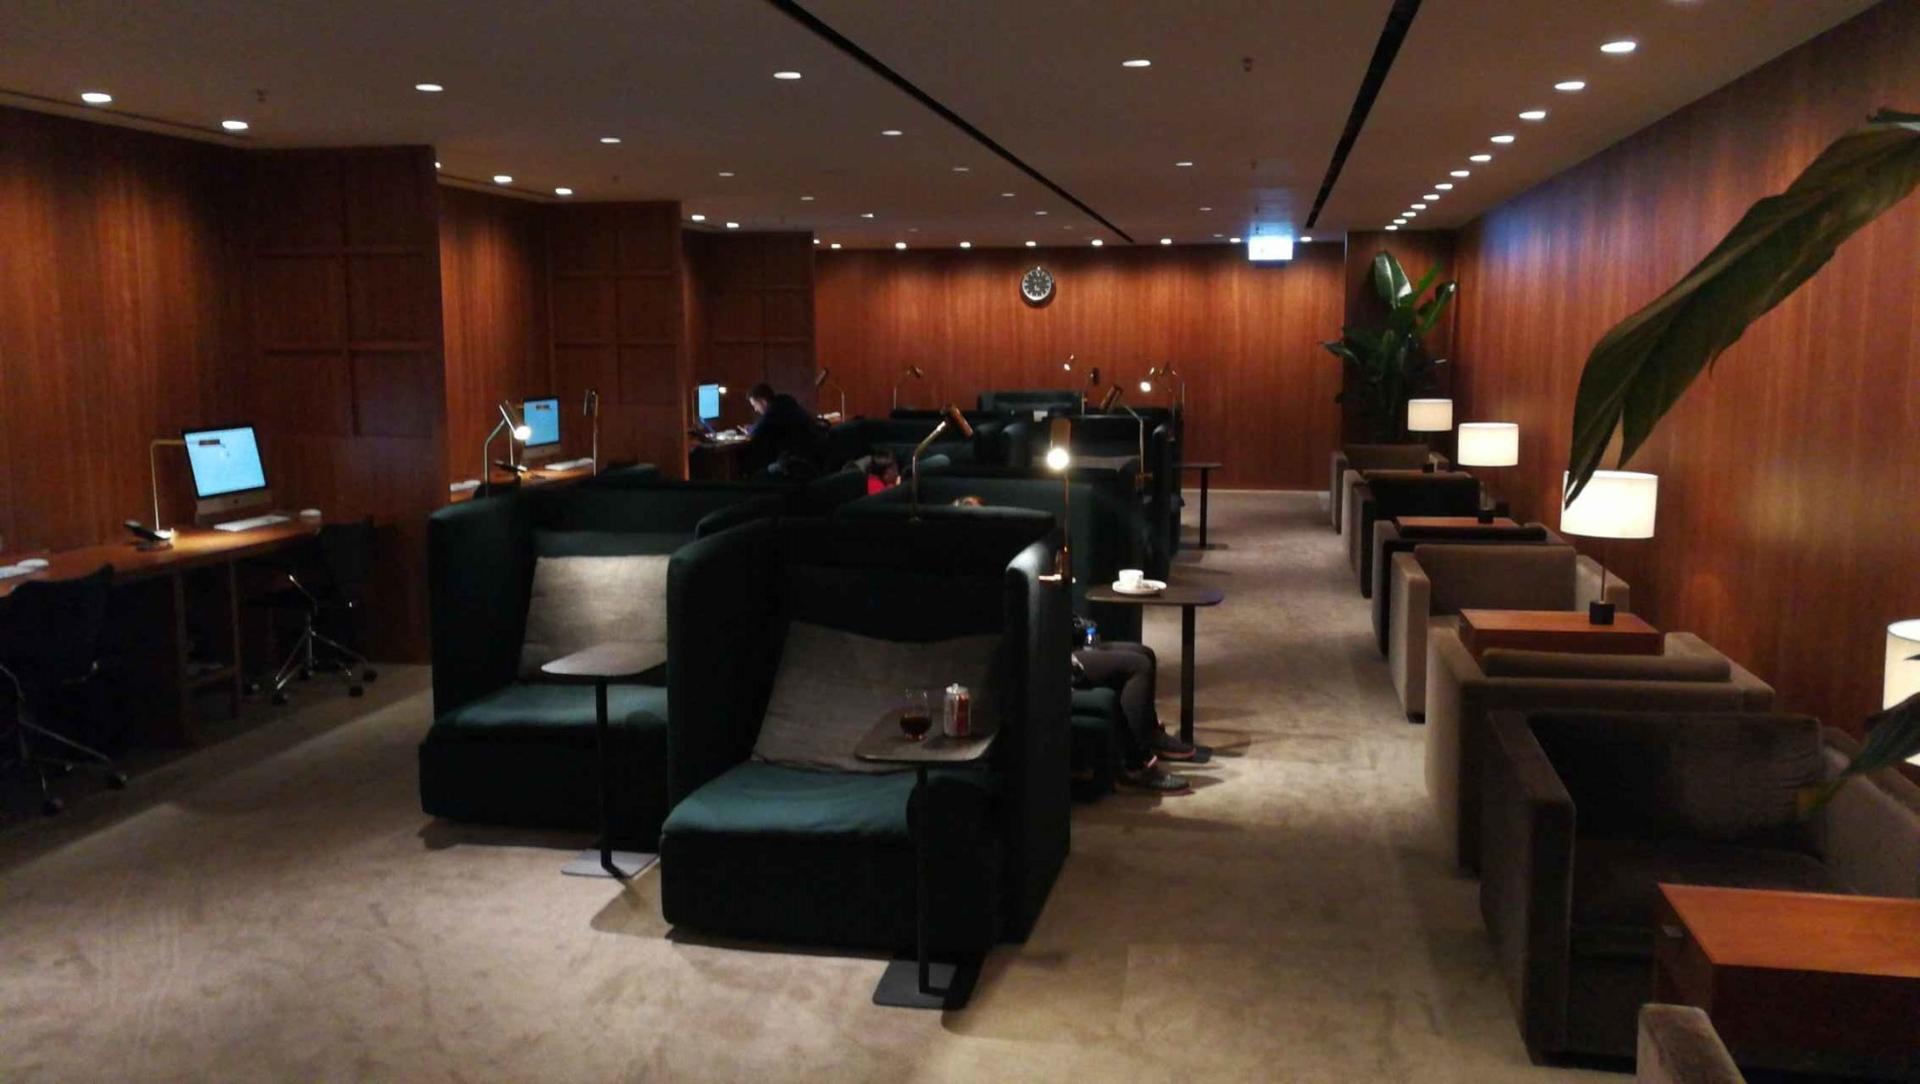 Cathay Pacific The Pier Business Class Lounge image 32 of 61